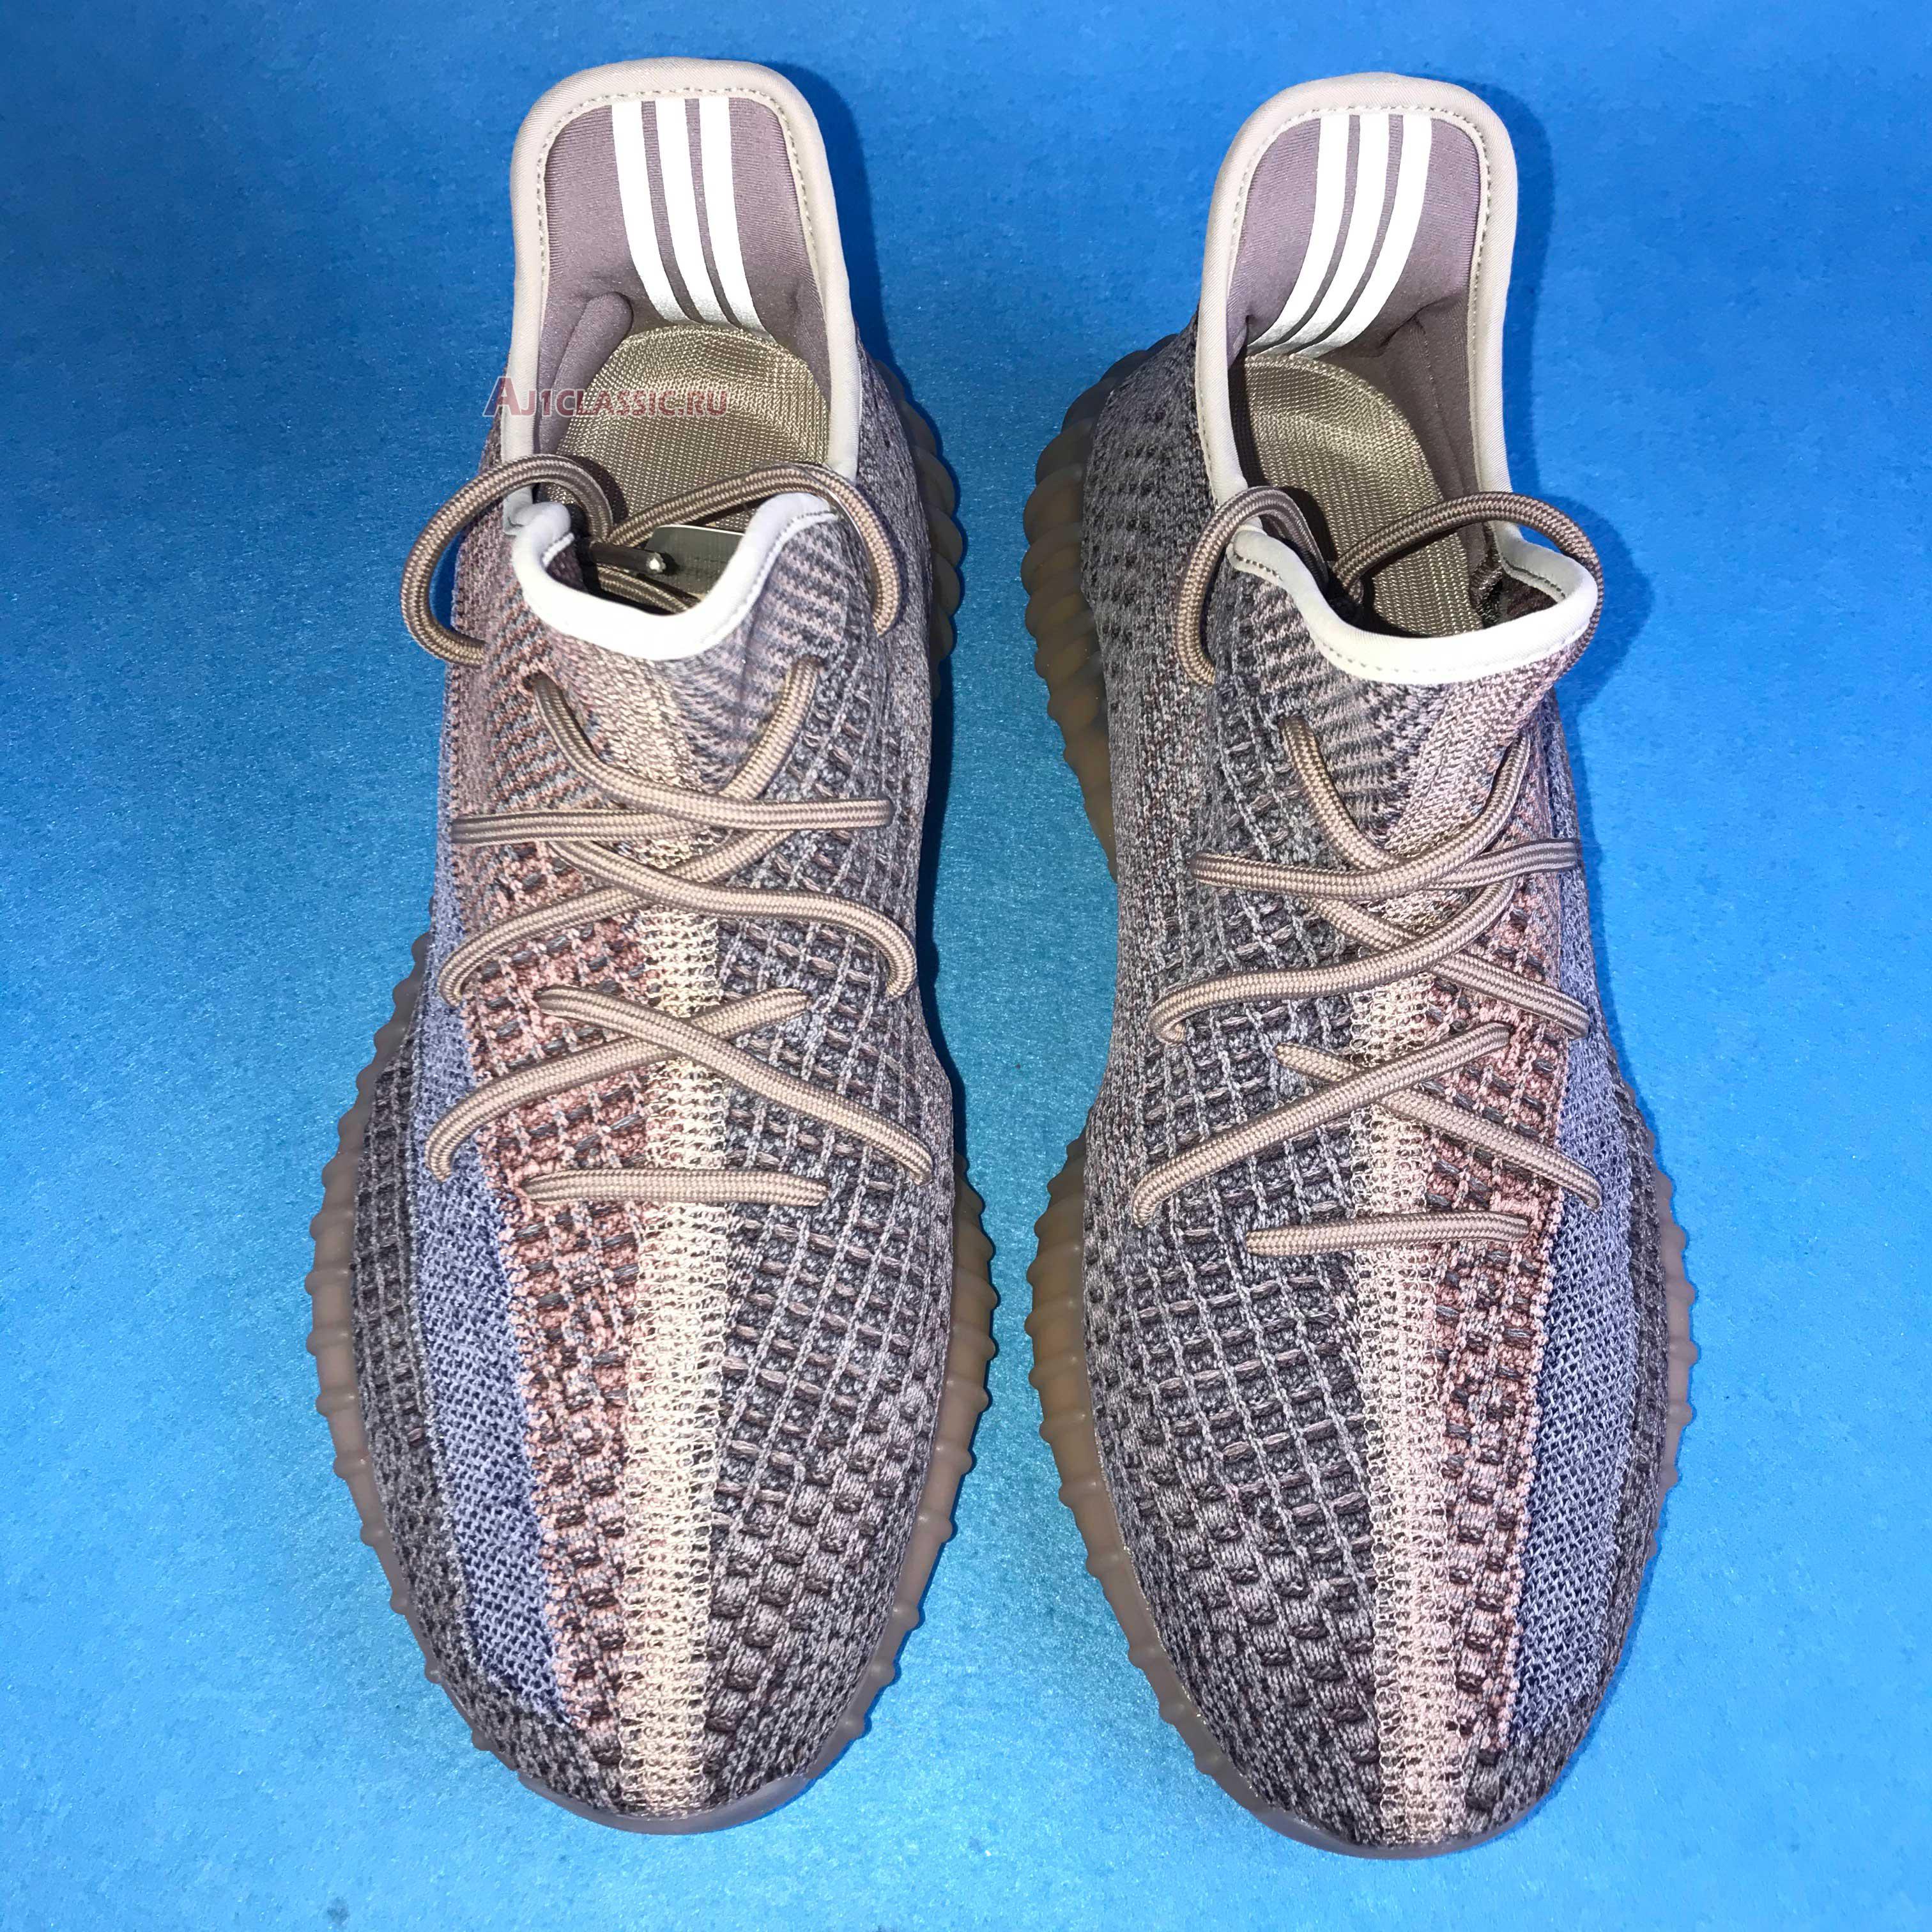 Adidas Yeezy Boost 350 V2 Fade H02795 Brown/Blue Sneakers